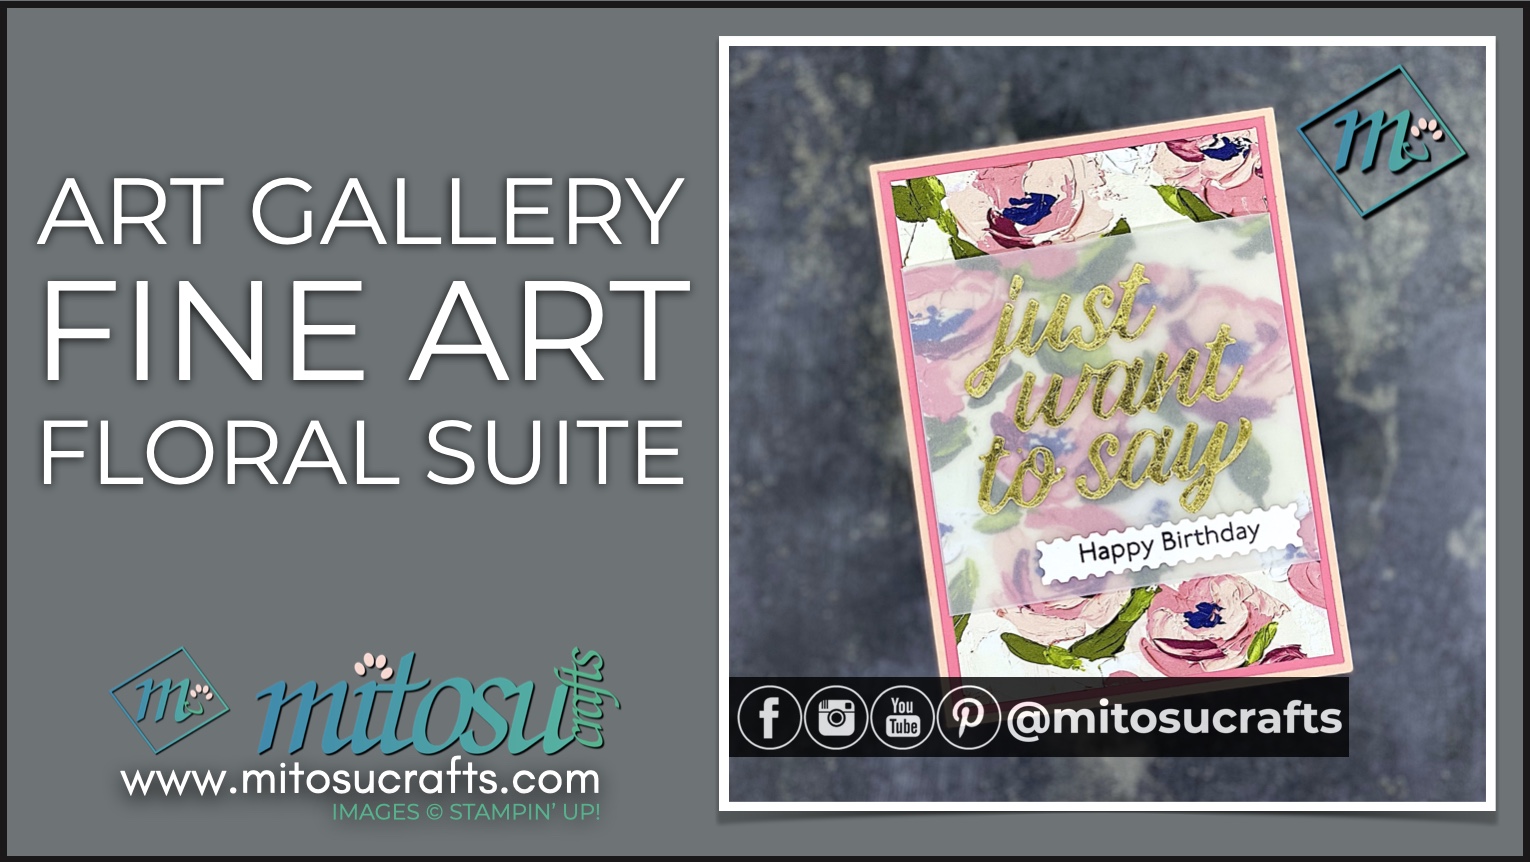 Art Gallery Bundle from Fine Art Floral Suite Card Idea by Barry Selwood & Jay Soriano Mitosu Crafts UK Stampin' Up! Demonstrators 